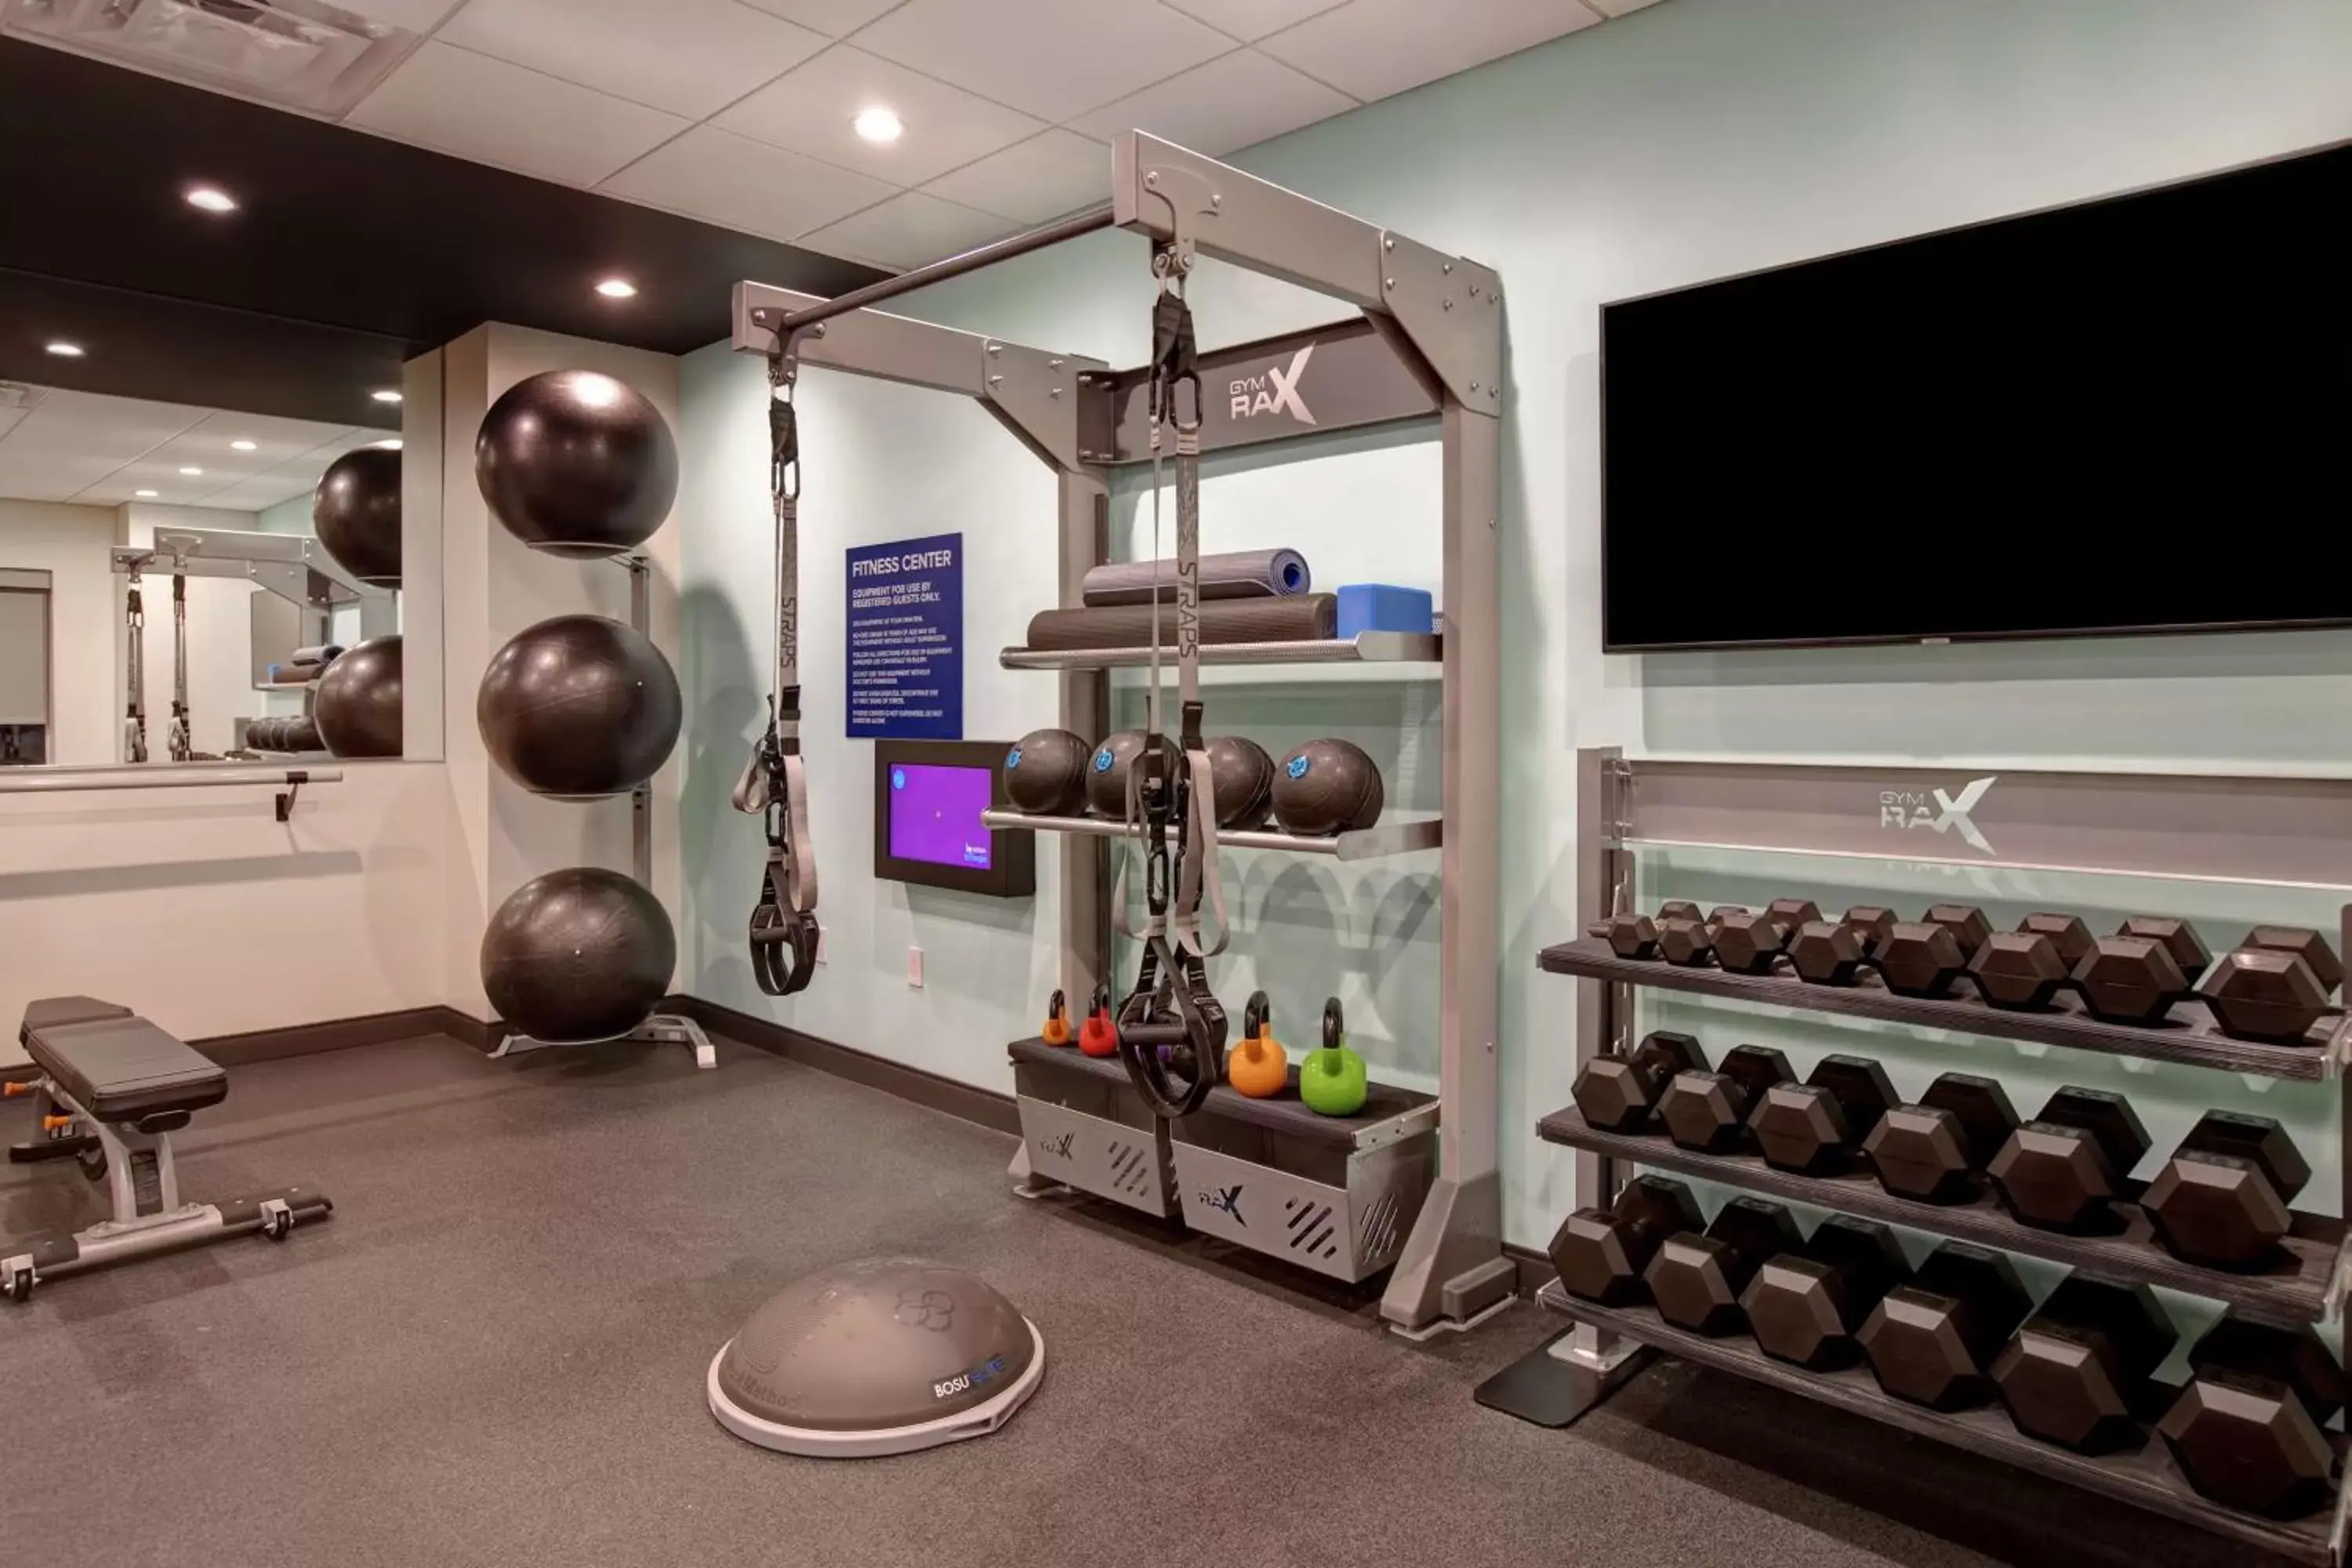 Fitness centre/facilities, Fitness Center/Facilities in Tru By Hilton Oxford